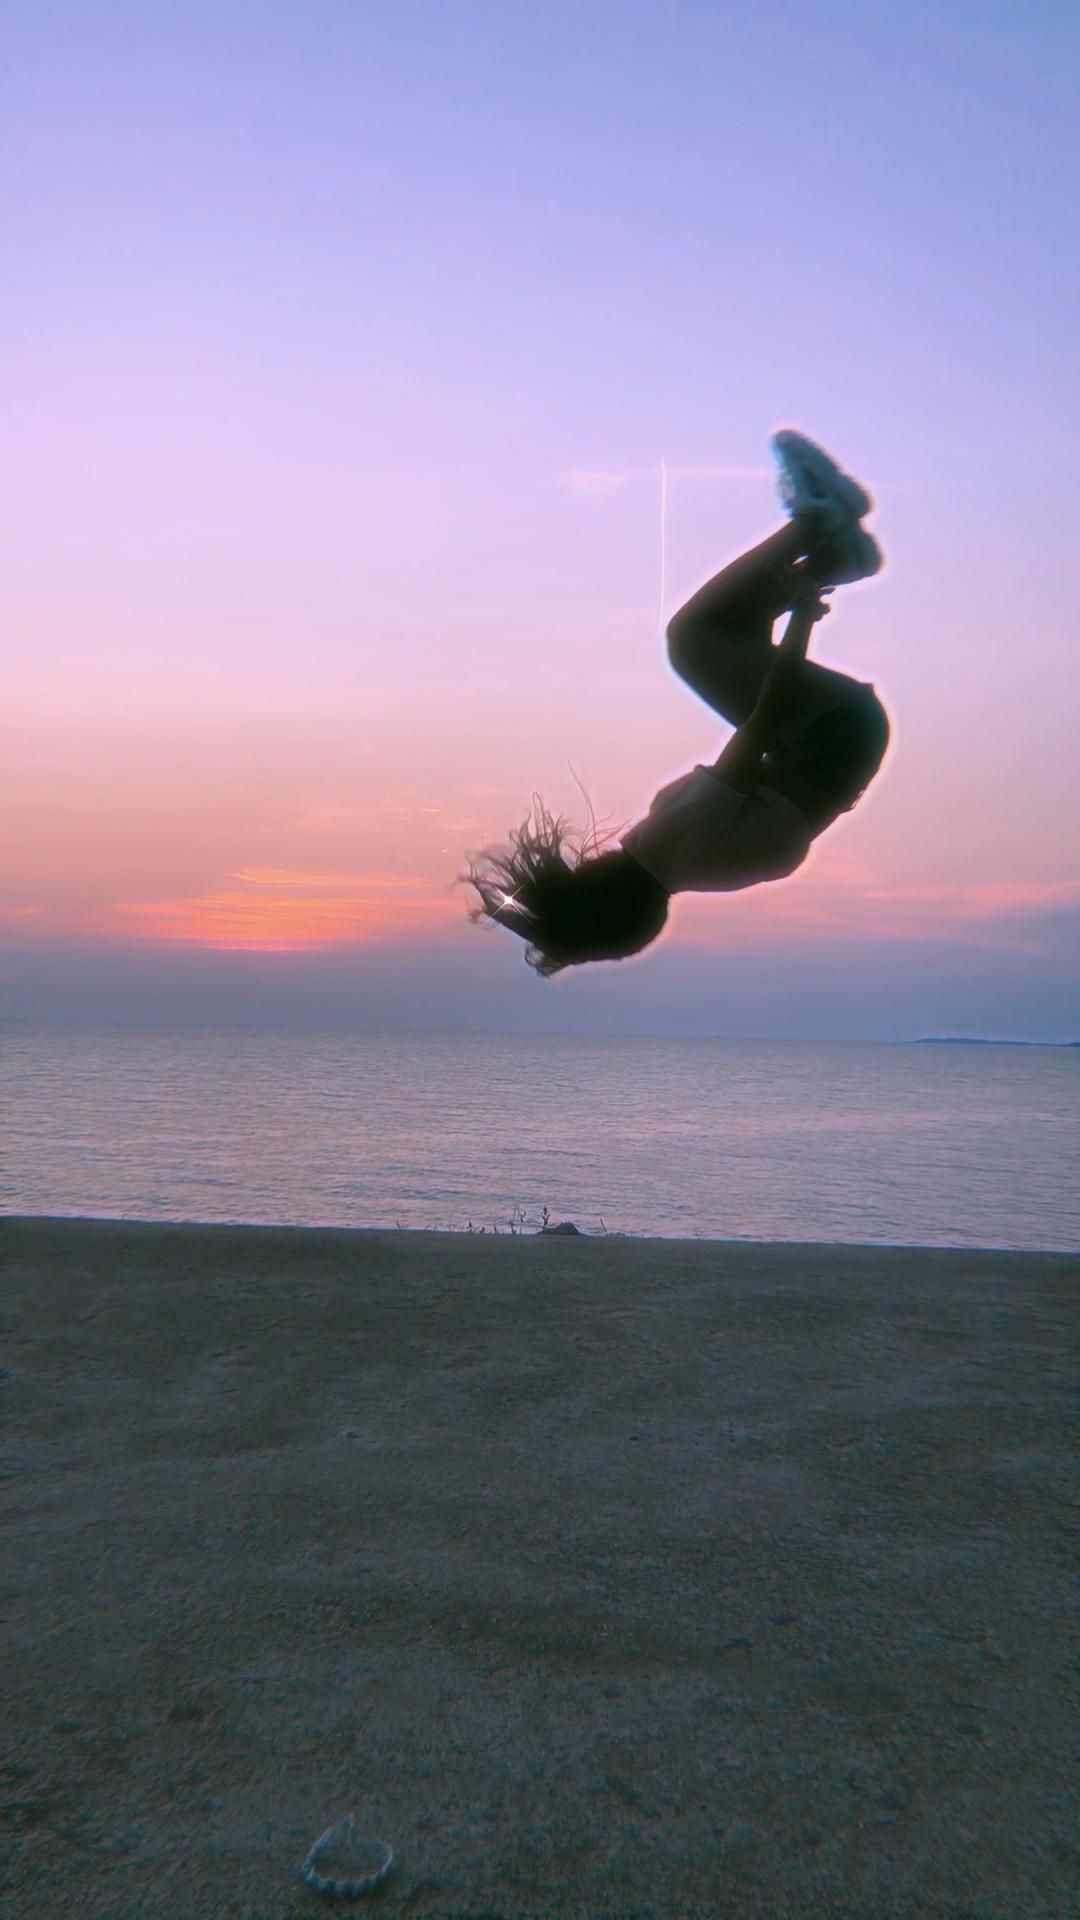 A person doing tricks on skateboard at sunset - Gymnastics